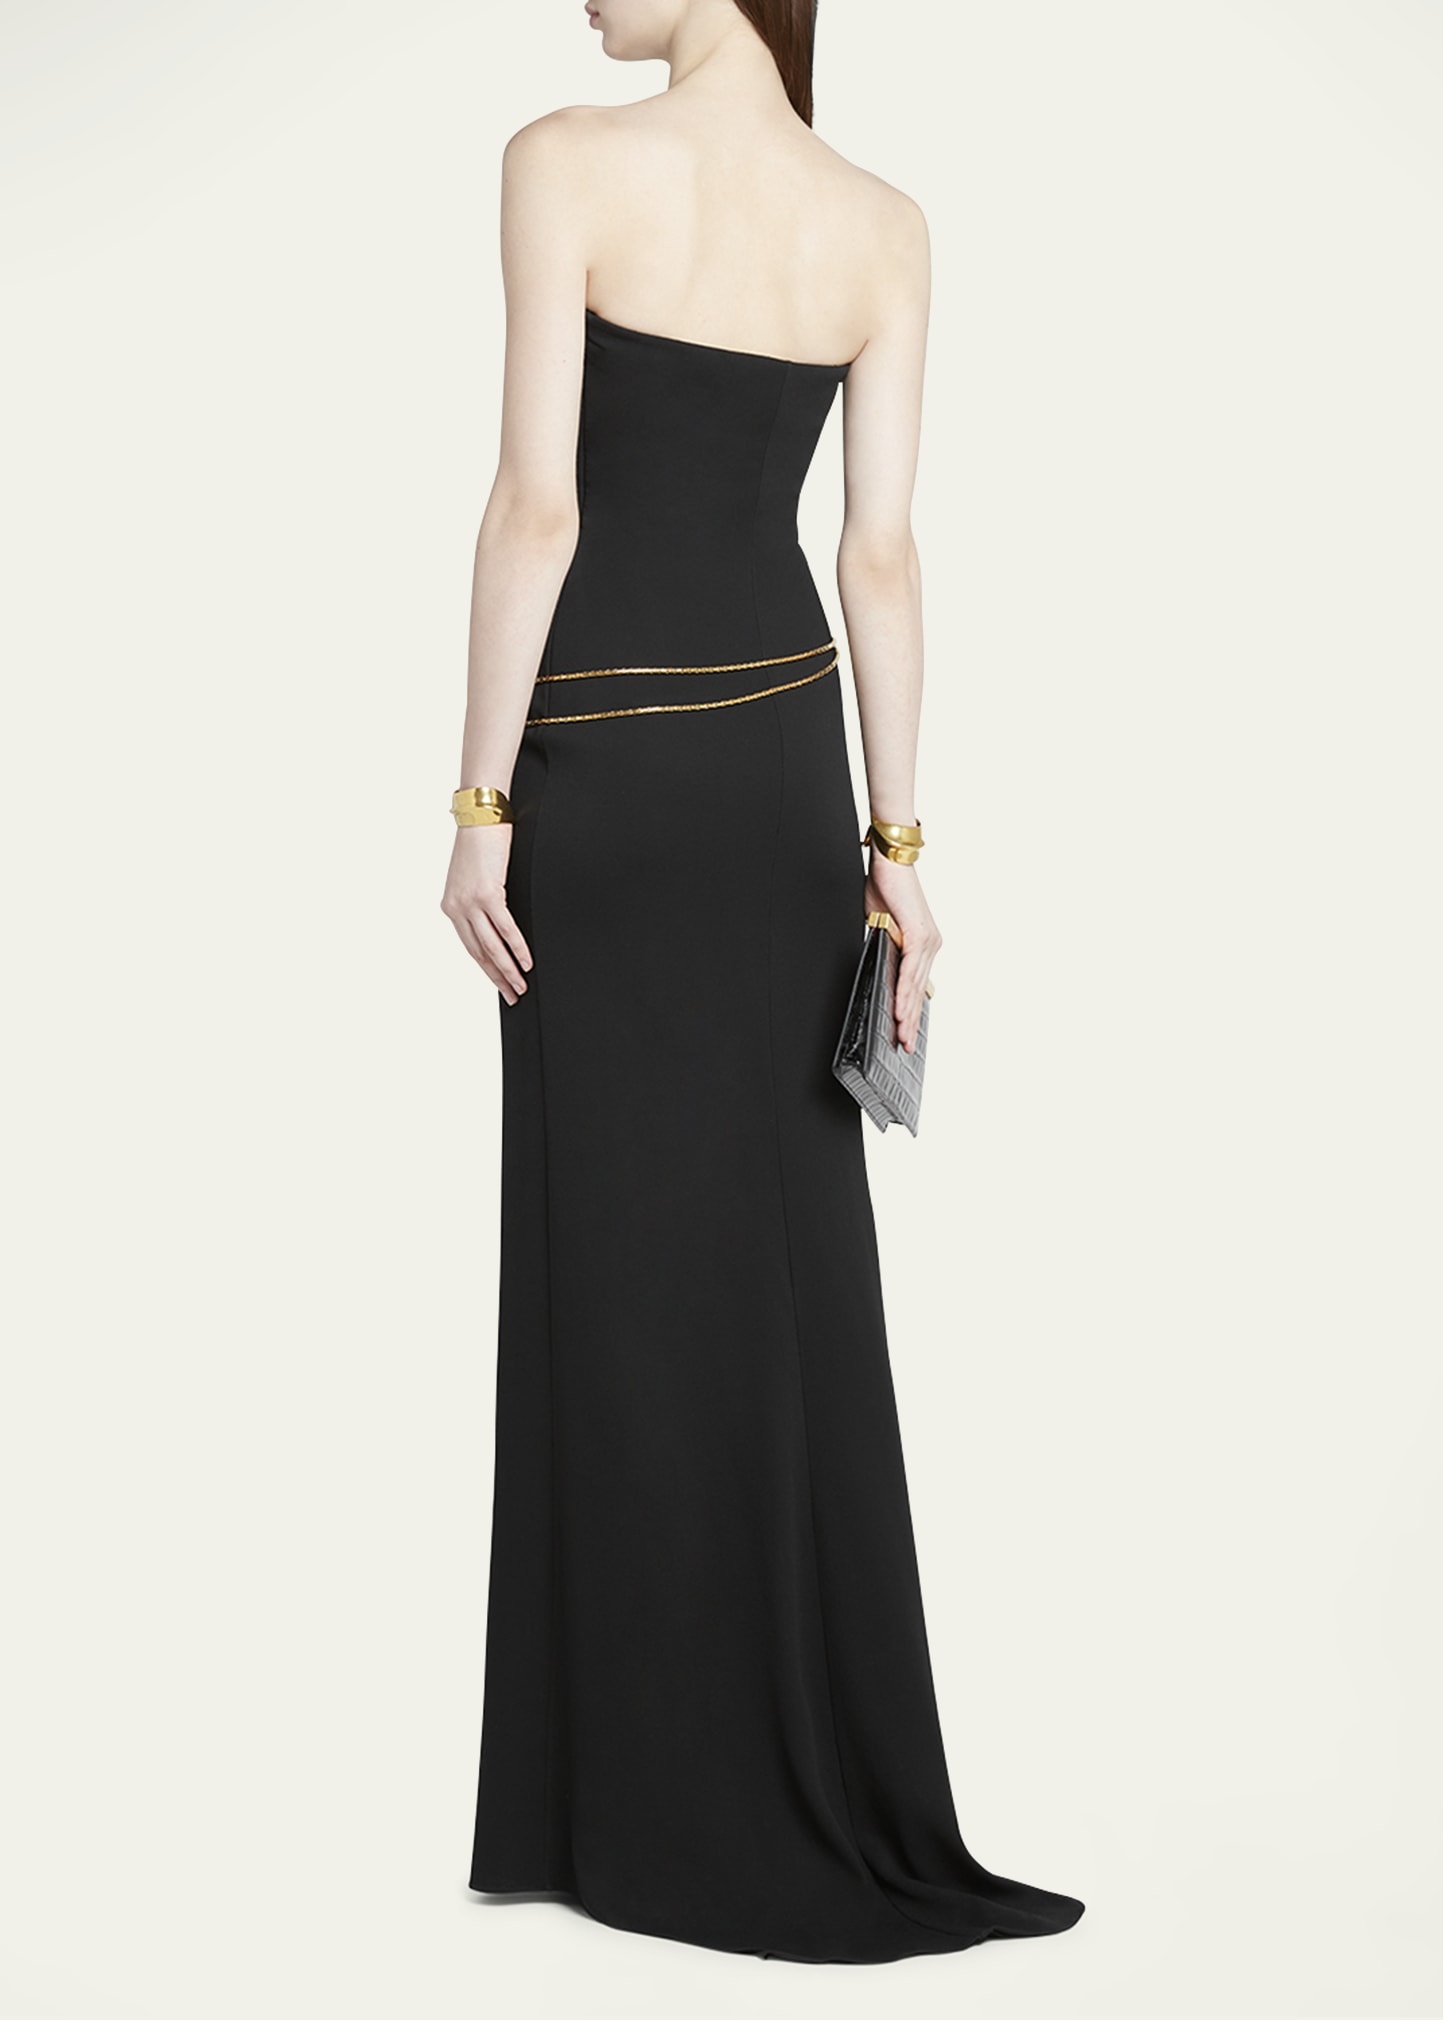 Stretch Sable Strapless Evening Dress with Cutout Detail - 3